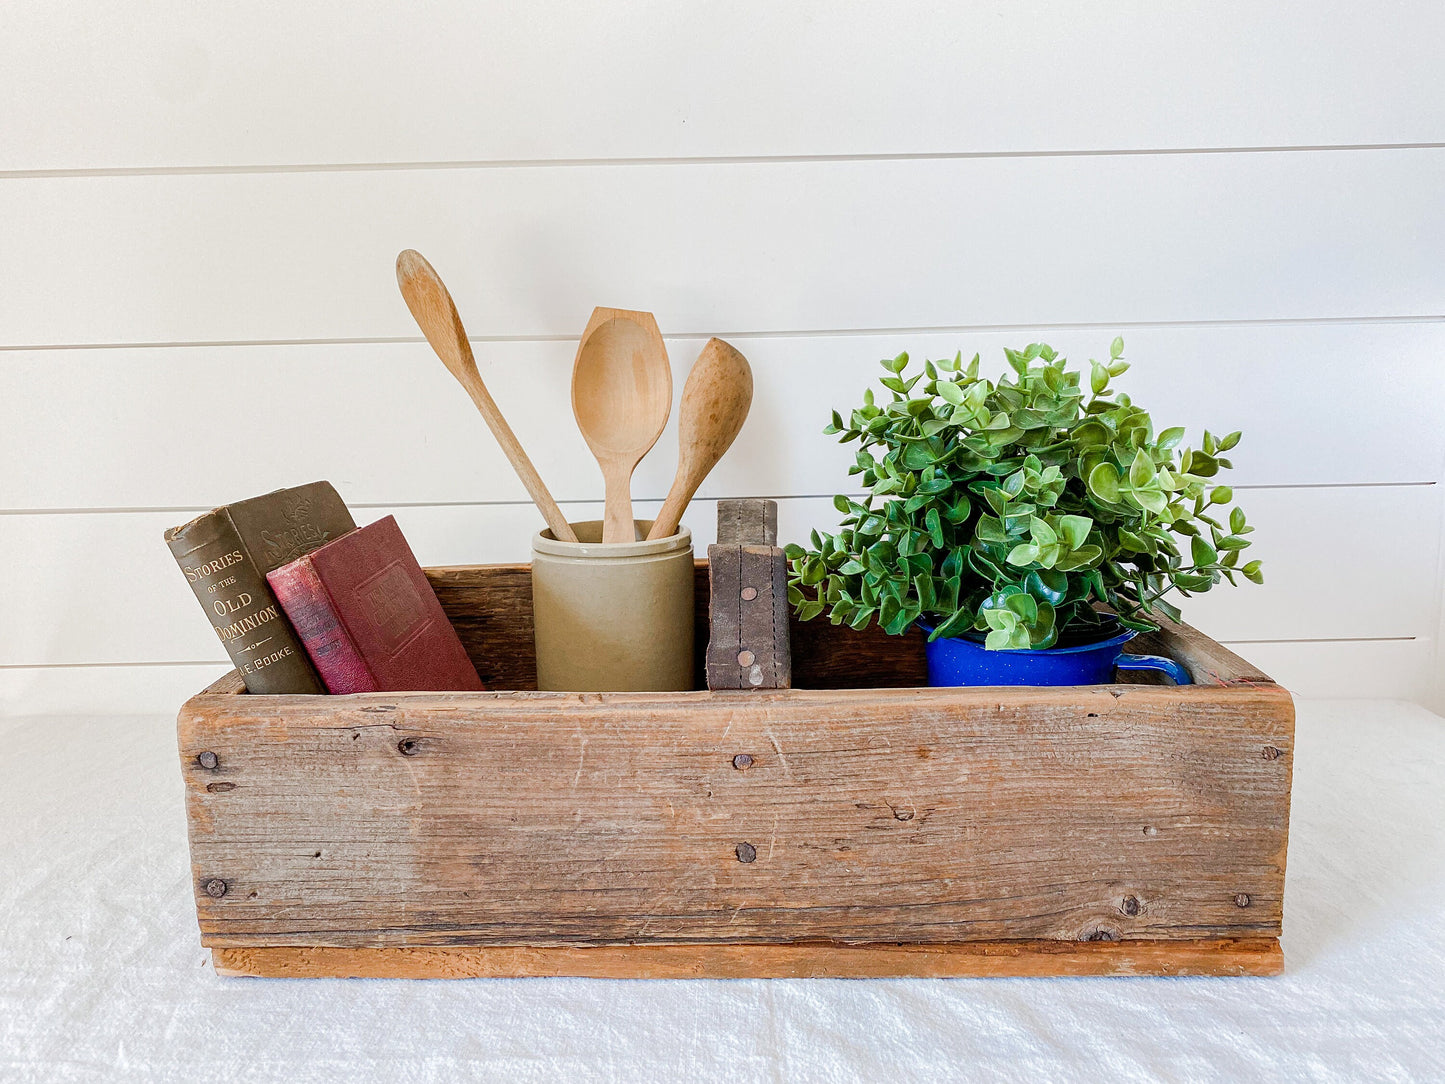 Vintage Handmade Rustic Wooden Storage Caddy with Dividers | Primitive Farmhouse Decor